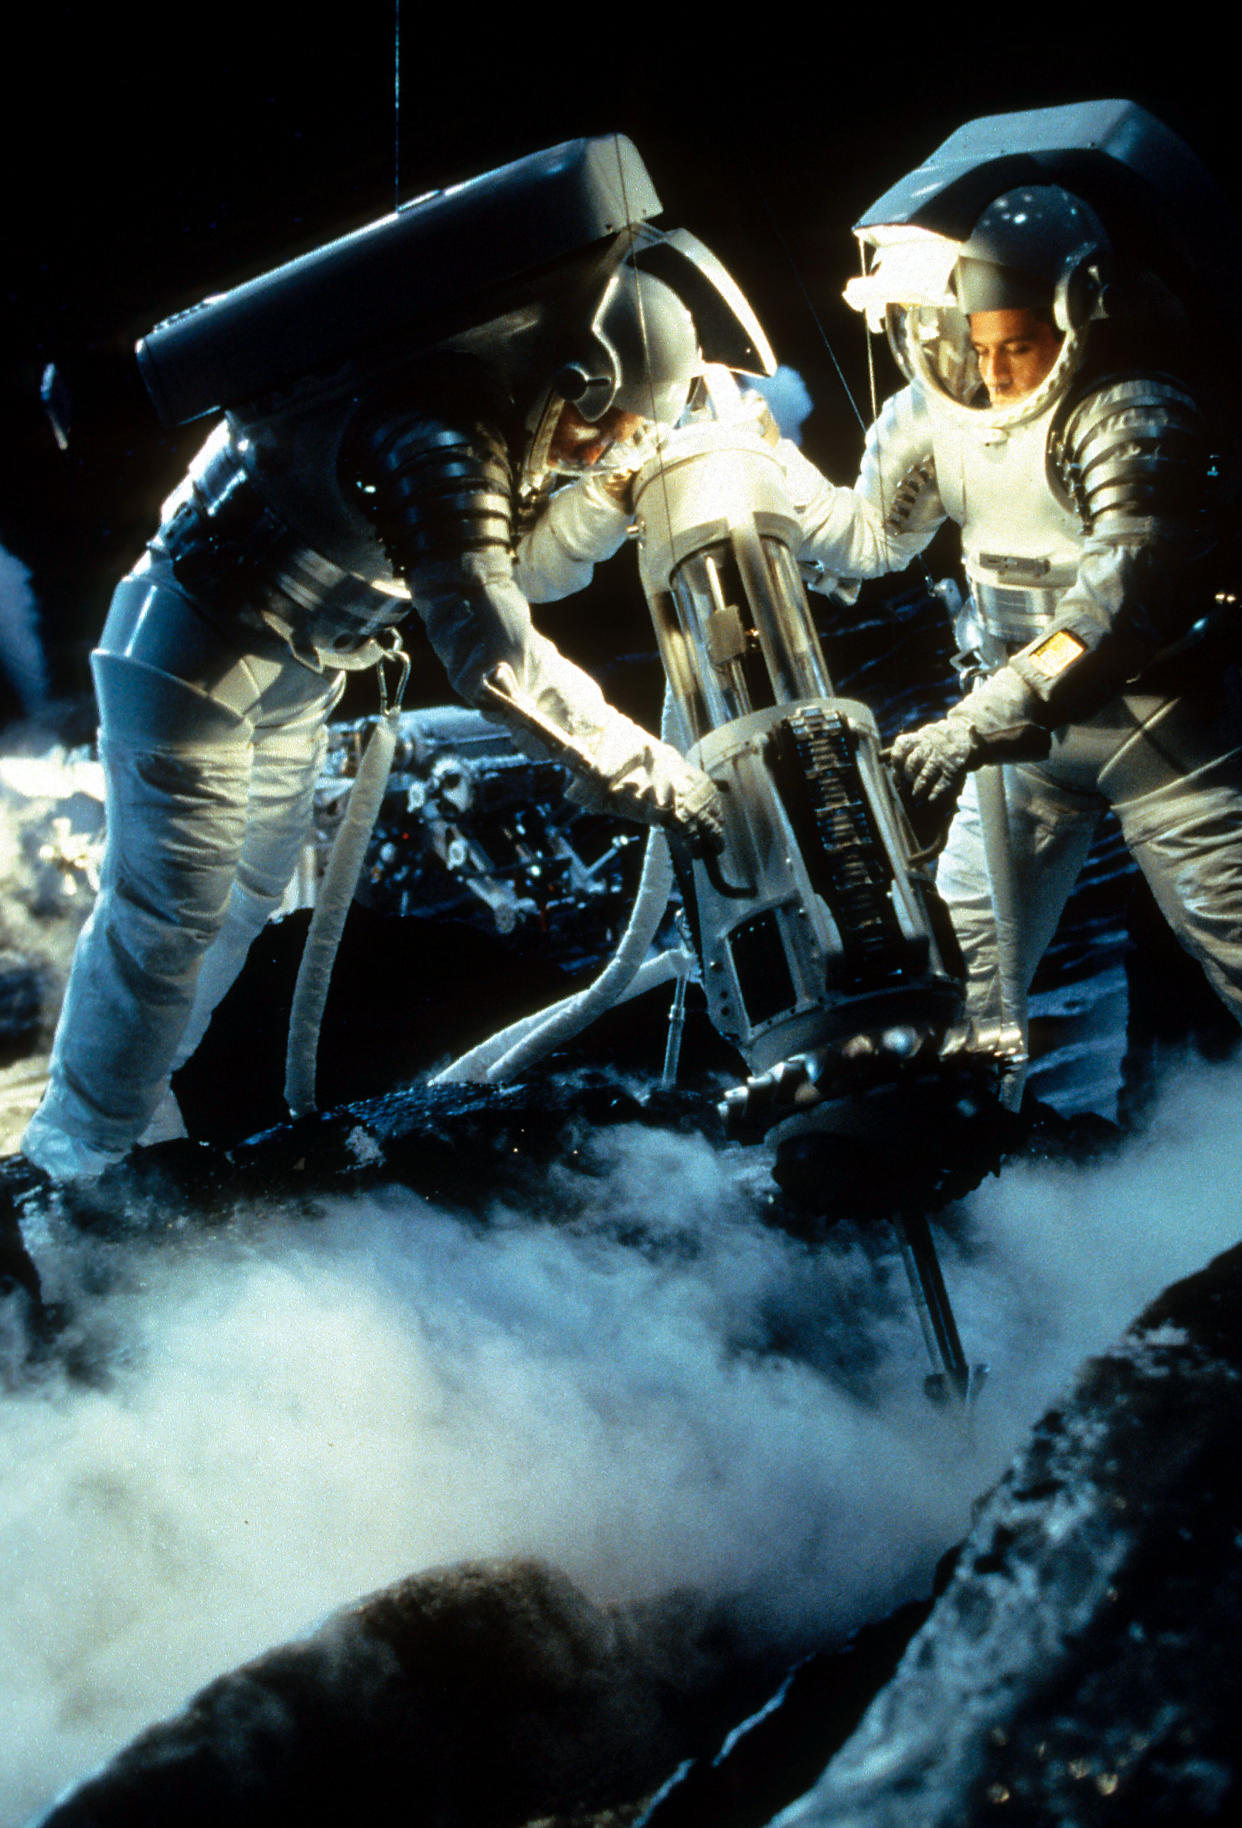 Two men in a space suit using a piece of machinery in a scene from the film 'Deep Impact', 1998. (Photo by Paramount Pictures/Getty Images)